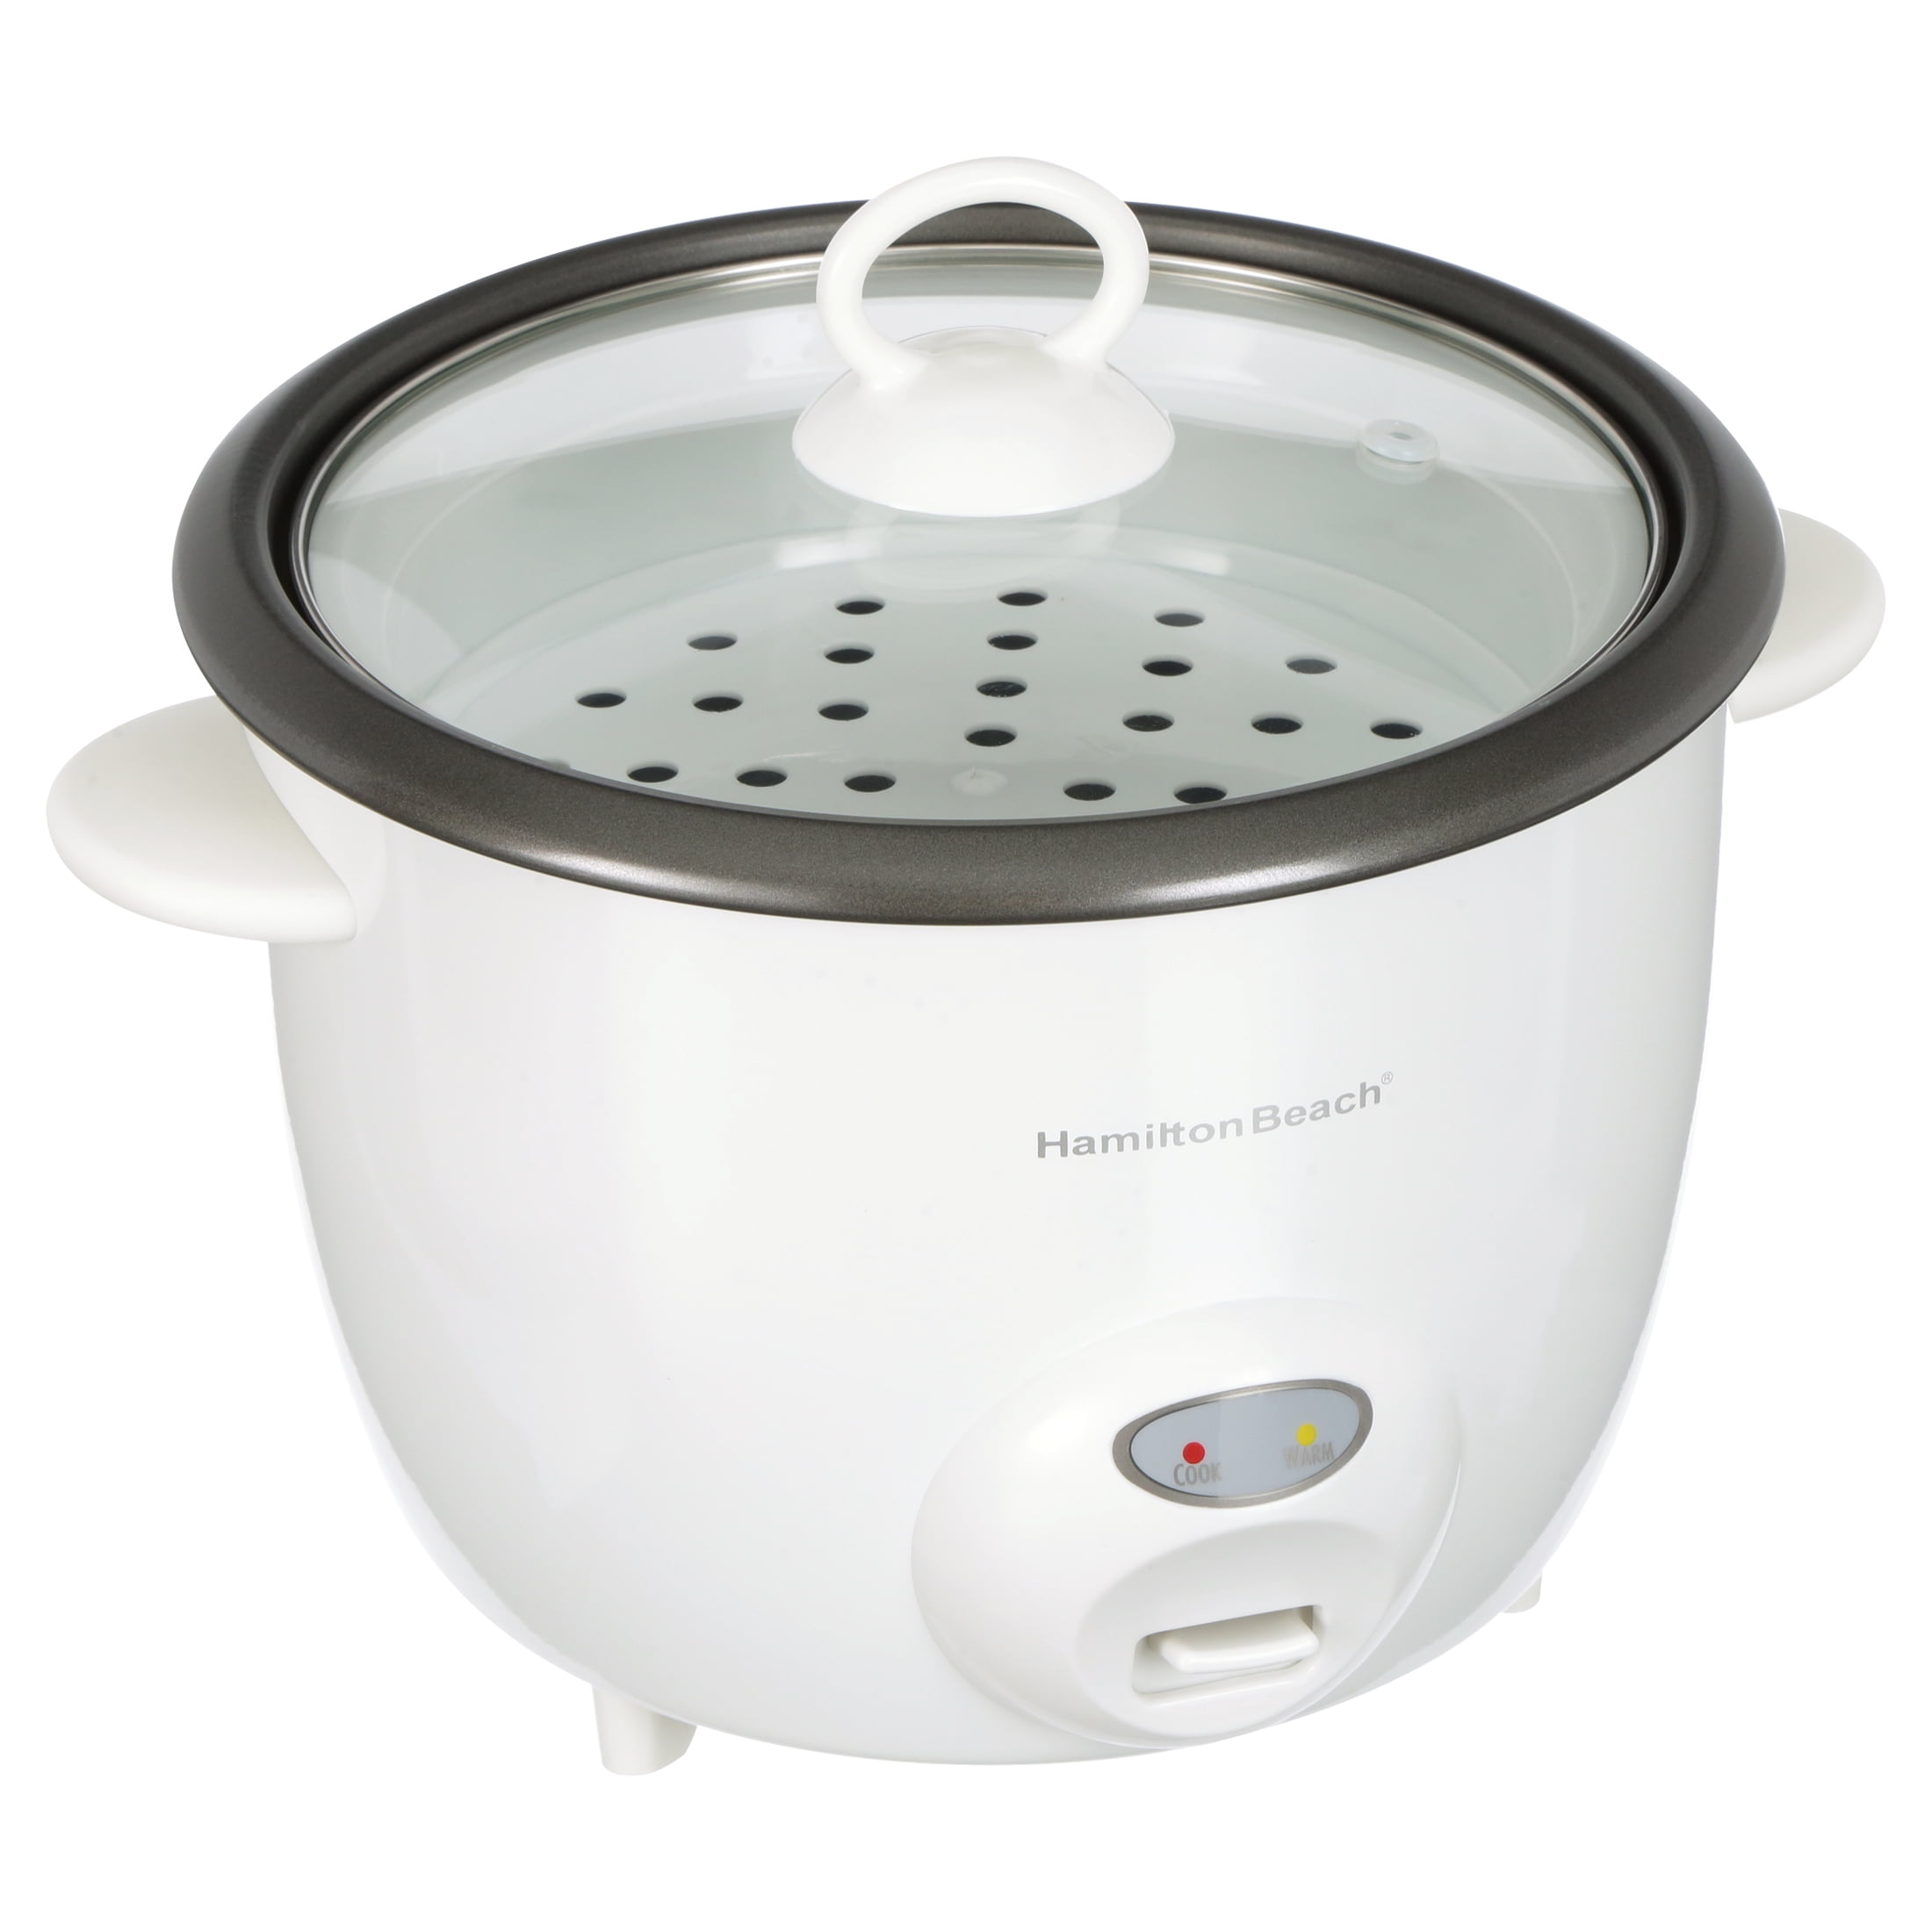 Hamilton Beach 12 Cup Capacity (Cooked) Multi-Function Rice Cooker - 37561